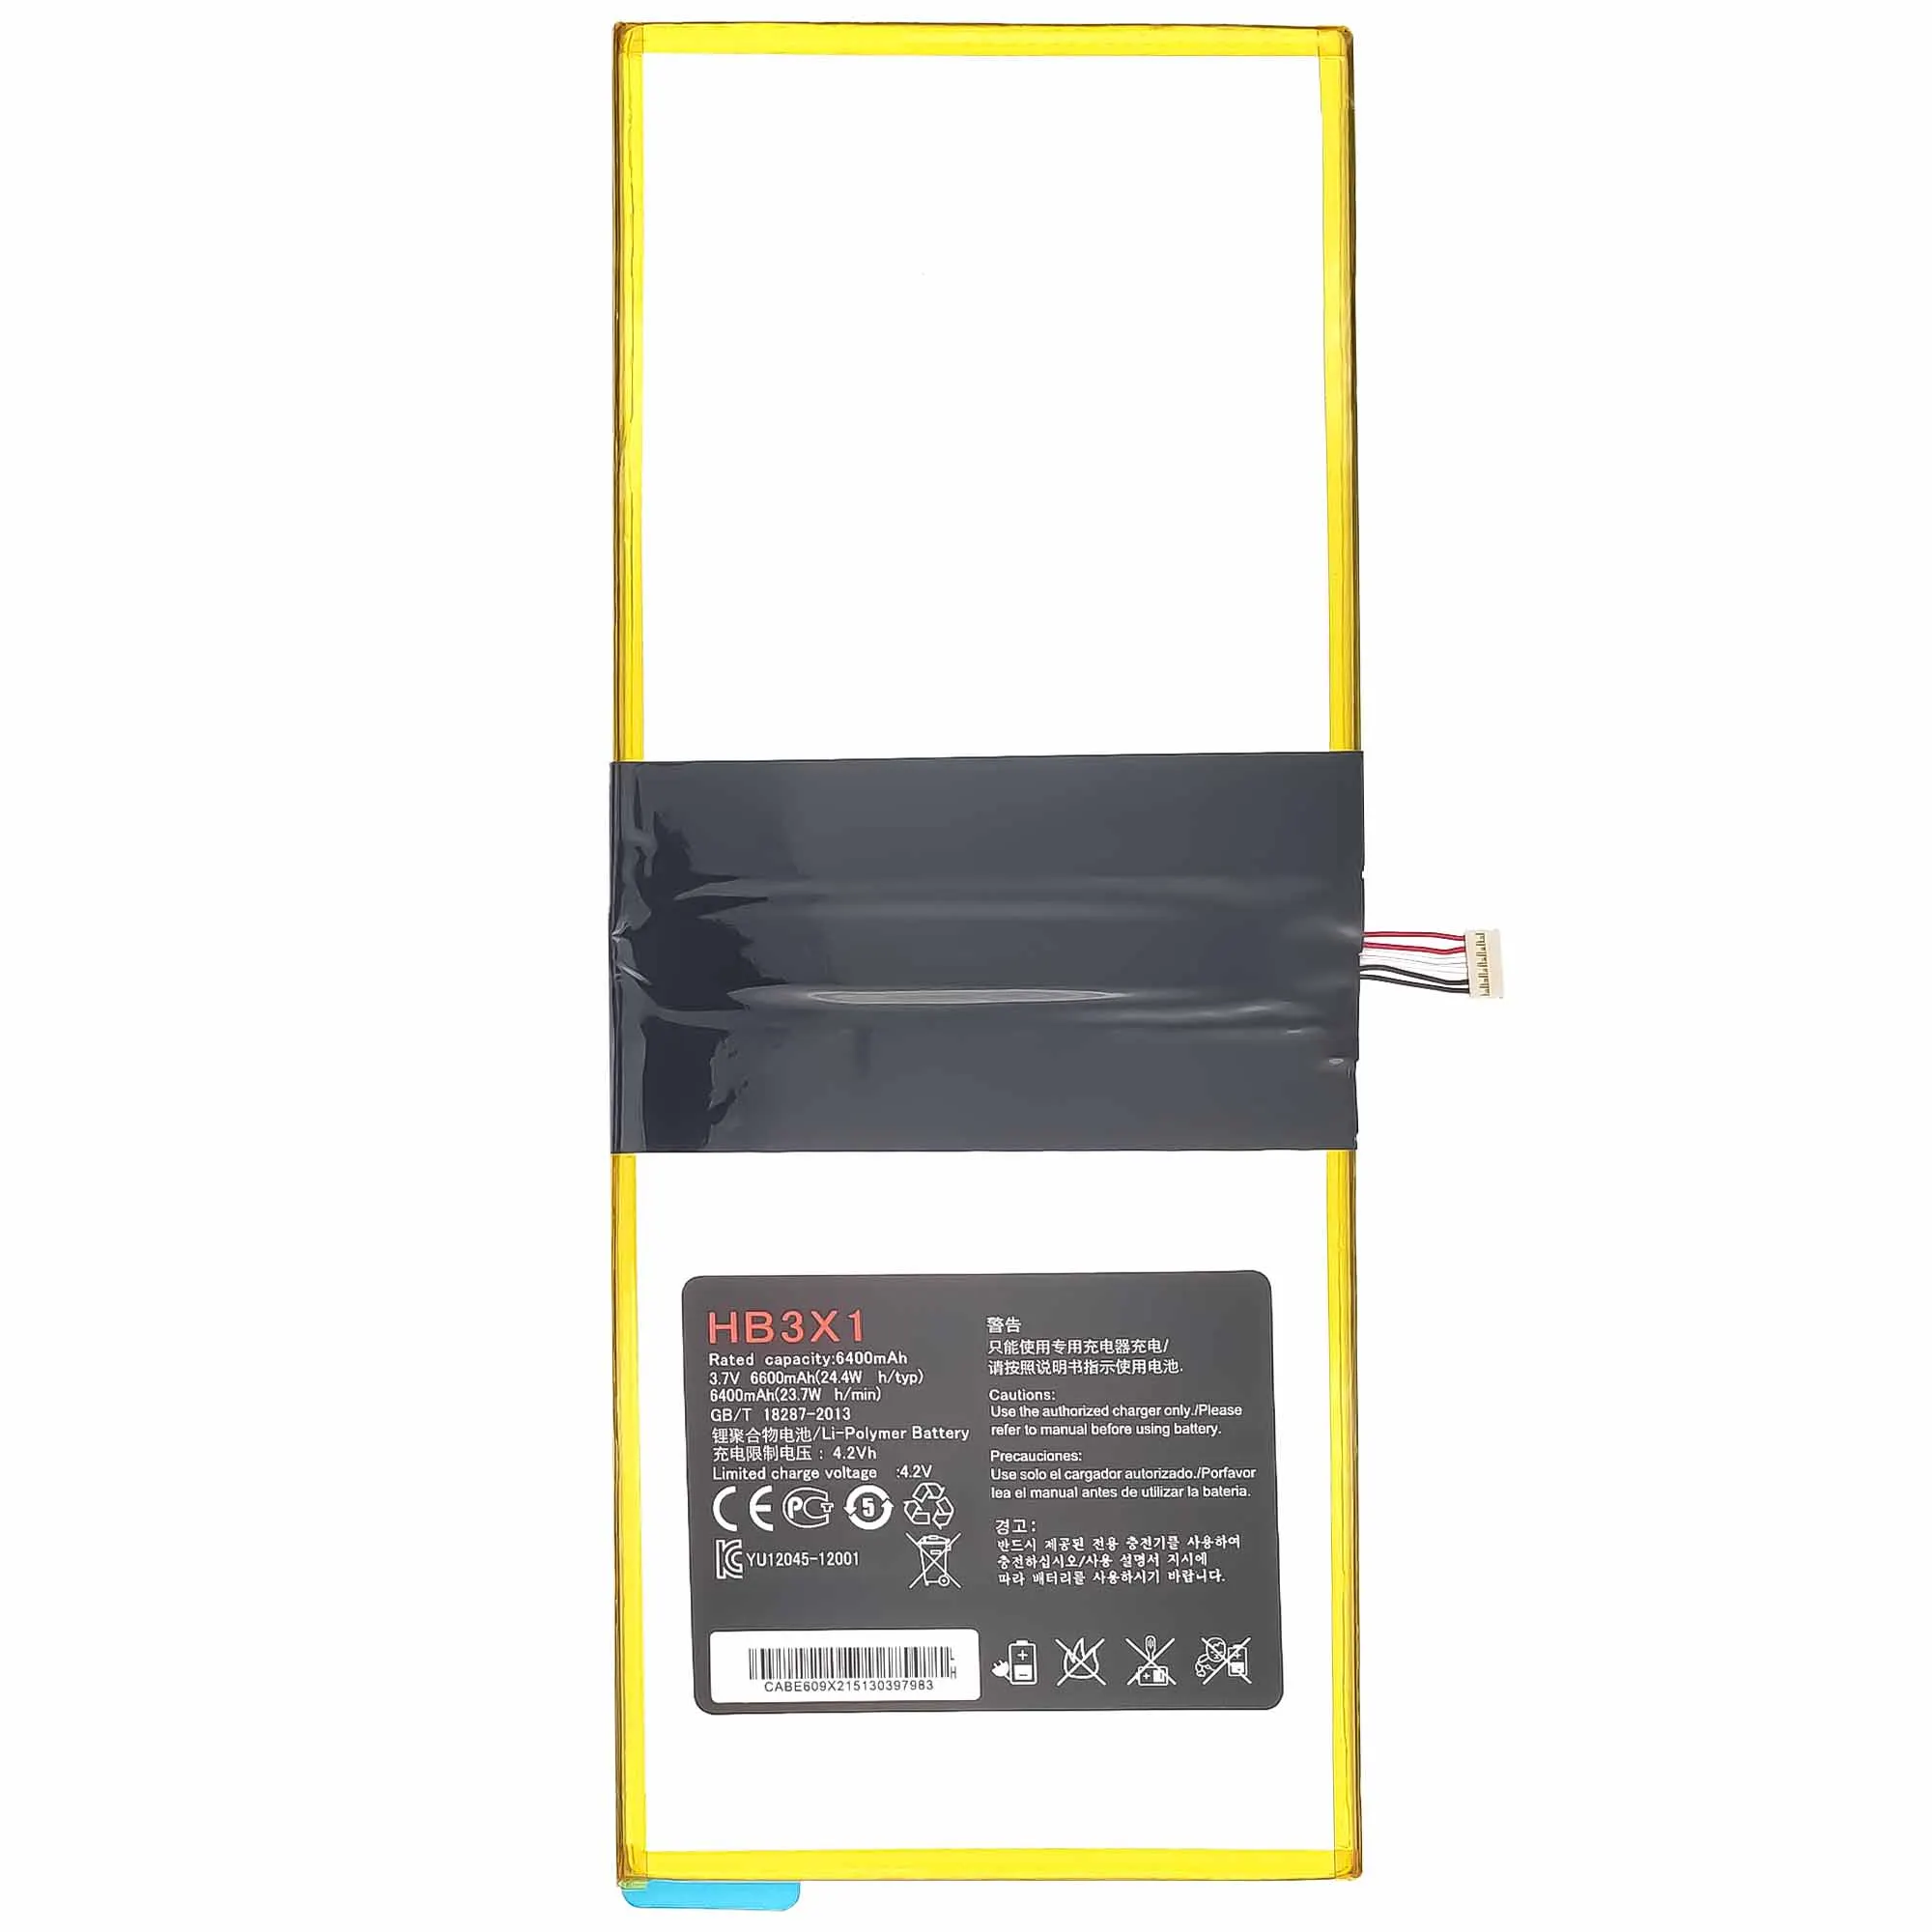 HB3X1 Battery For Huawei MediaPad 10 Link S10-201wa Media Pad 10Link S10 201wa Tablet Bateria 6400mah org replacement enlarge